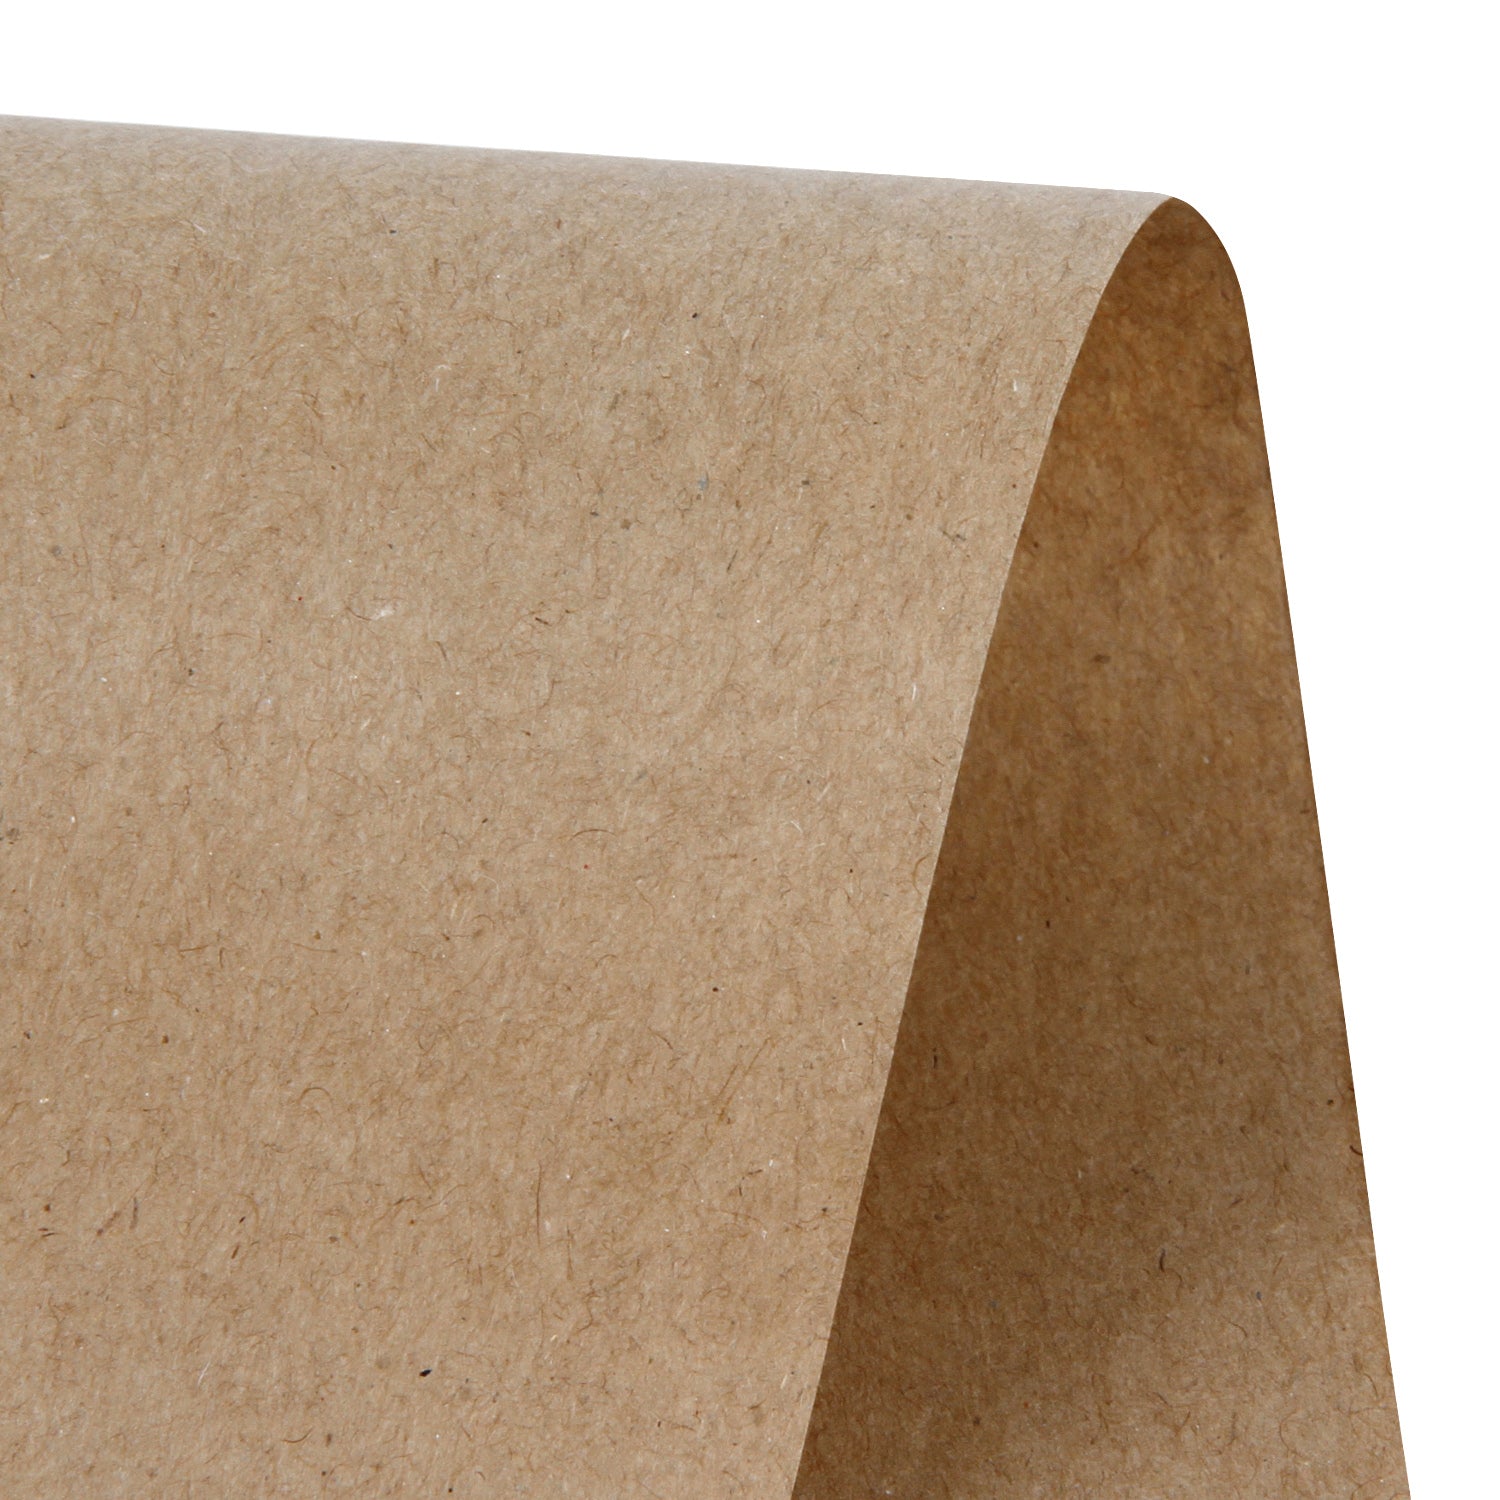 Snowday Kraft Wrapping Paper 24x417', Half Ream Roll